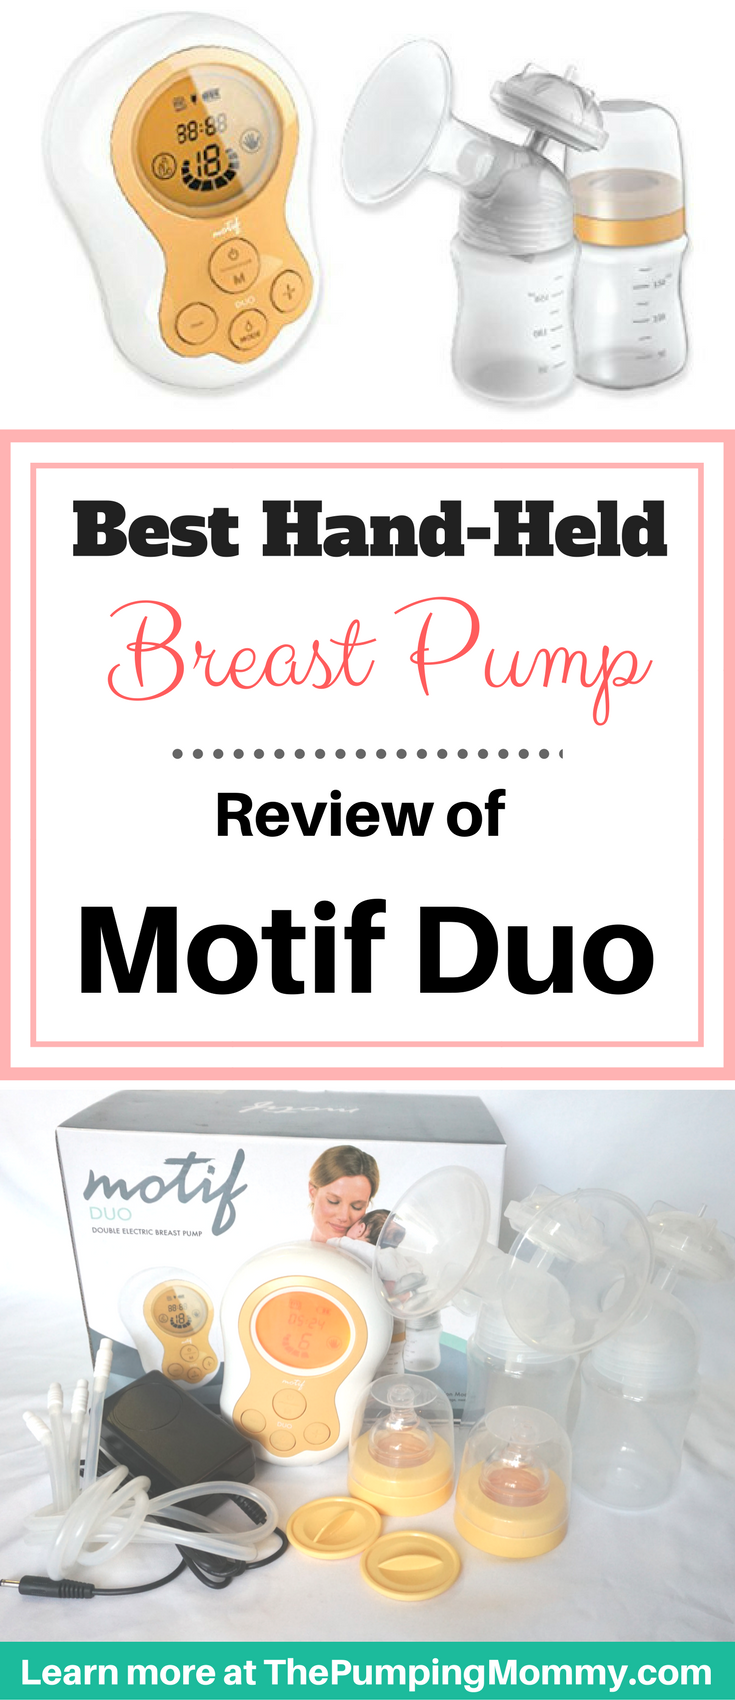 Best Hand-Held Breast Pump: Review of the Motif Duo - The Pumping Mommy